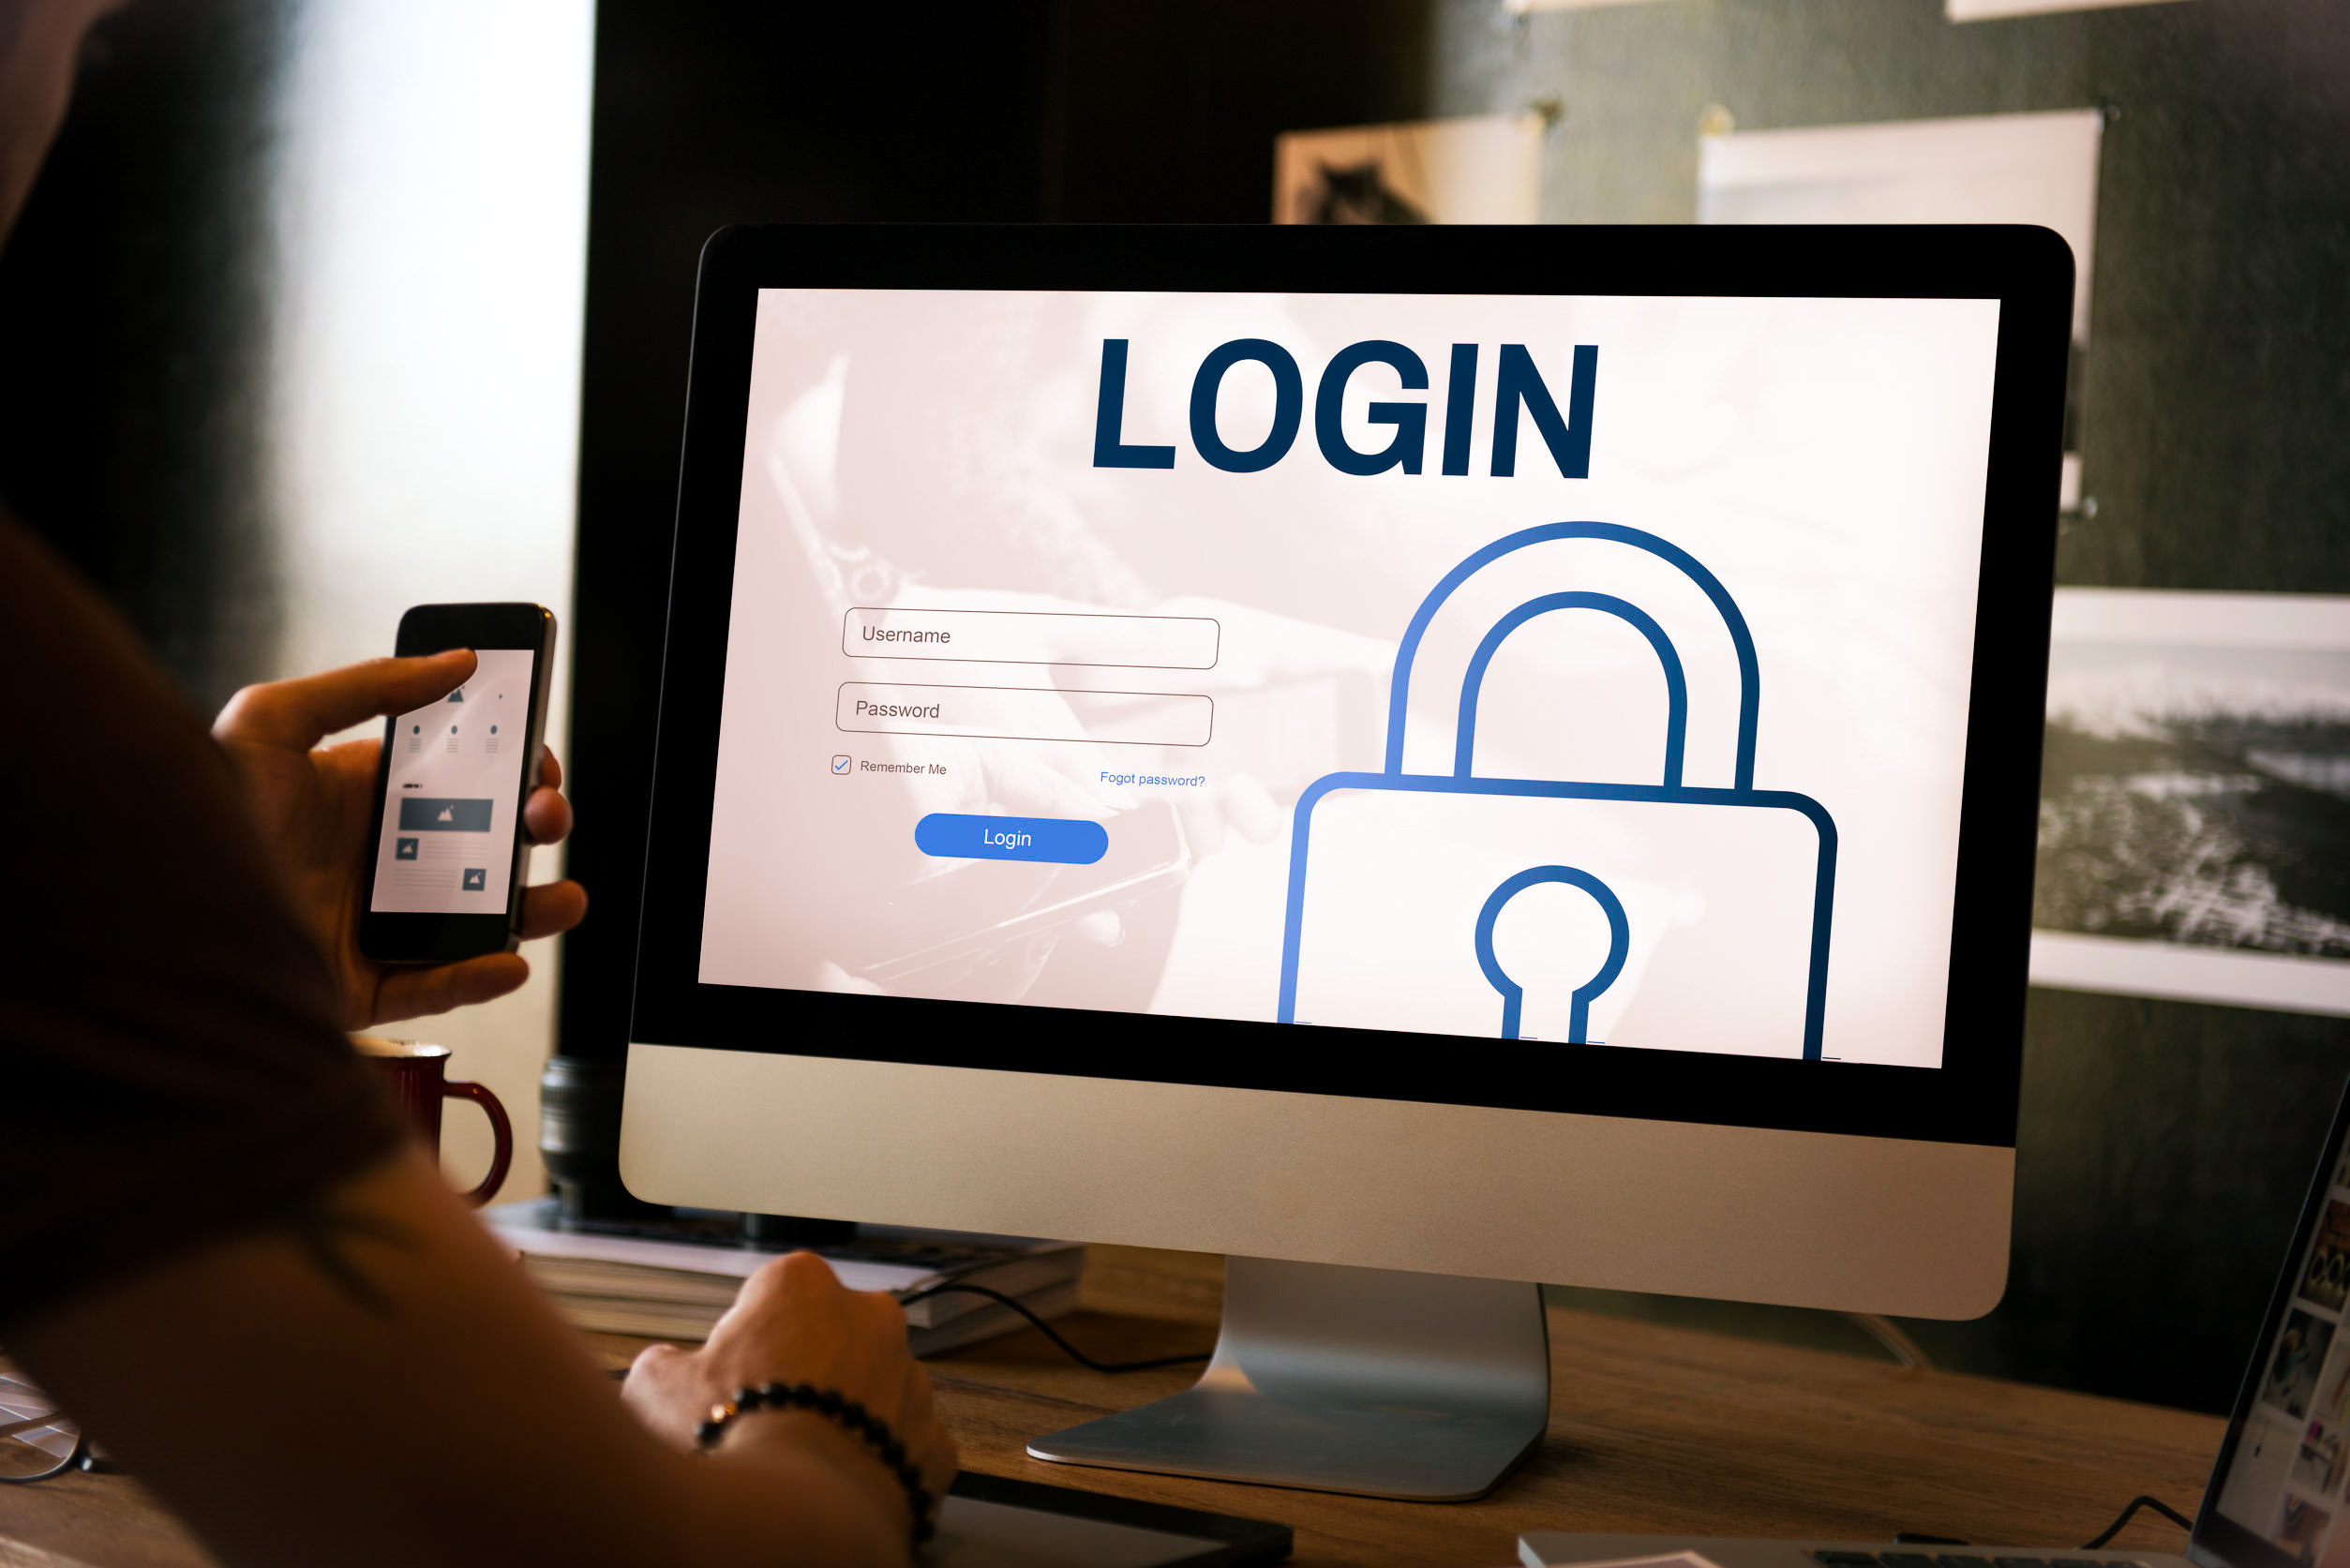 Use These 4 Simple Solutions to Improve Password Security - Featured Image